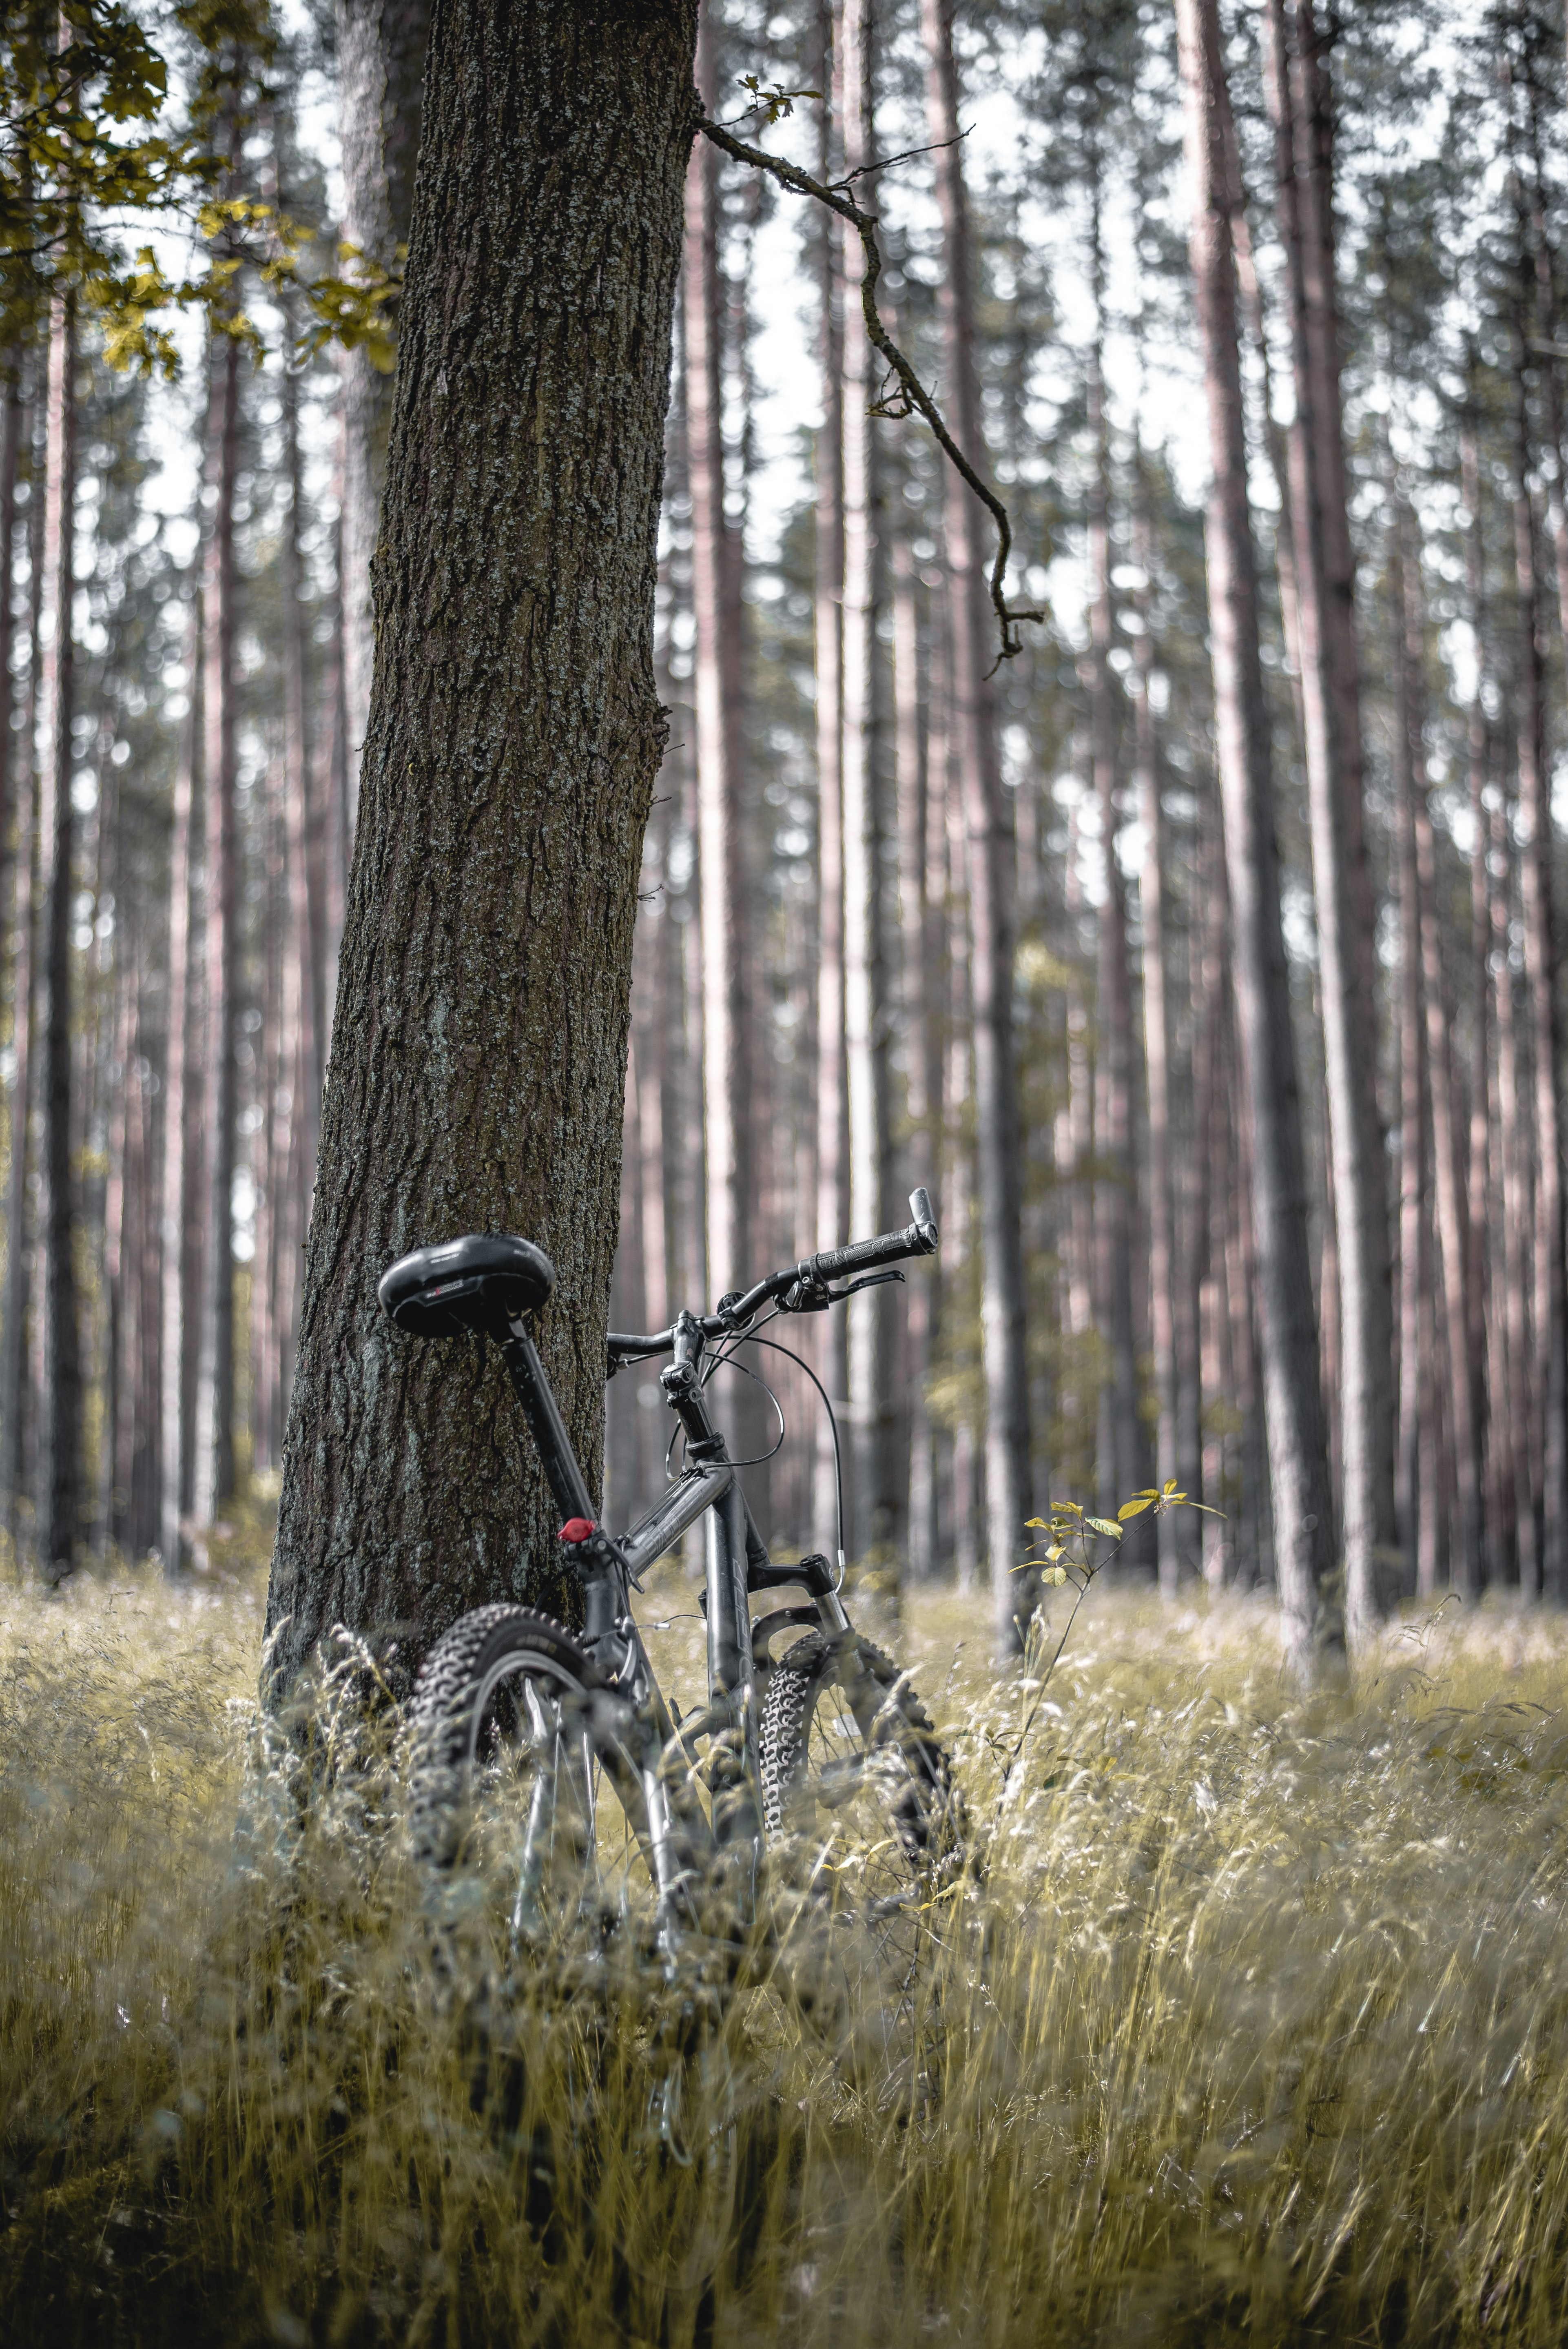 wallpapers miscellaneous, trees, miscellanea, forest, stroll, bicycle